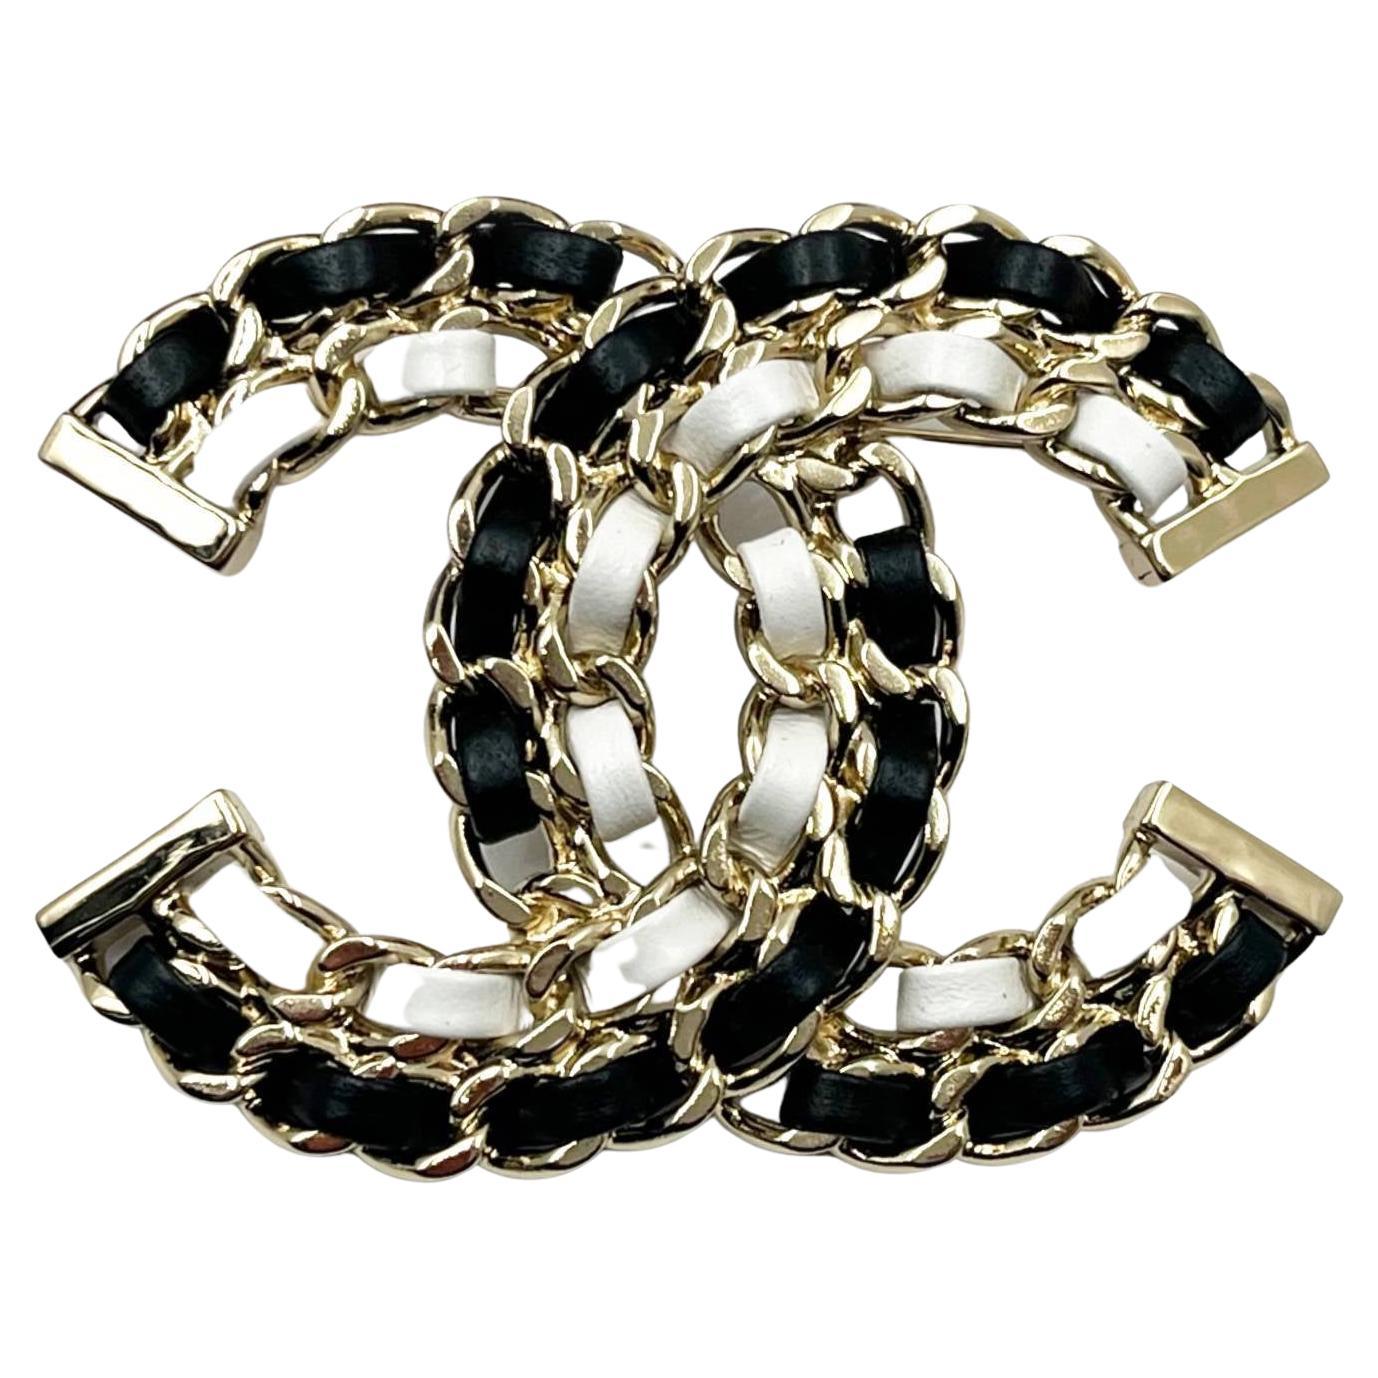 2019S CHANEL CLASSIC GOLD Iconic Crystal LETTERS BROOCHES Set of 6